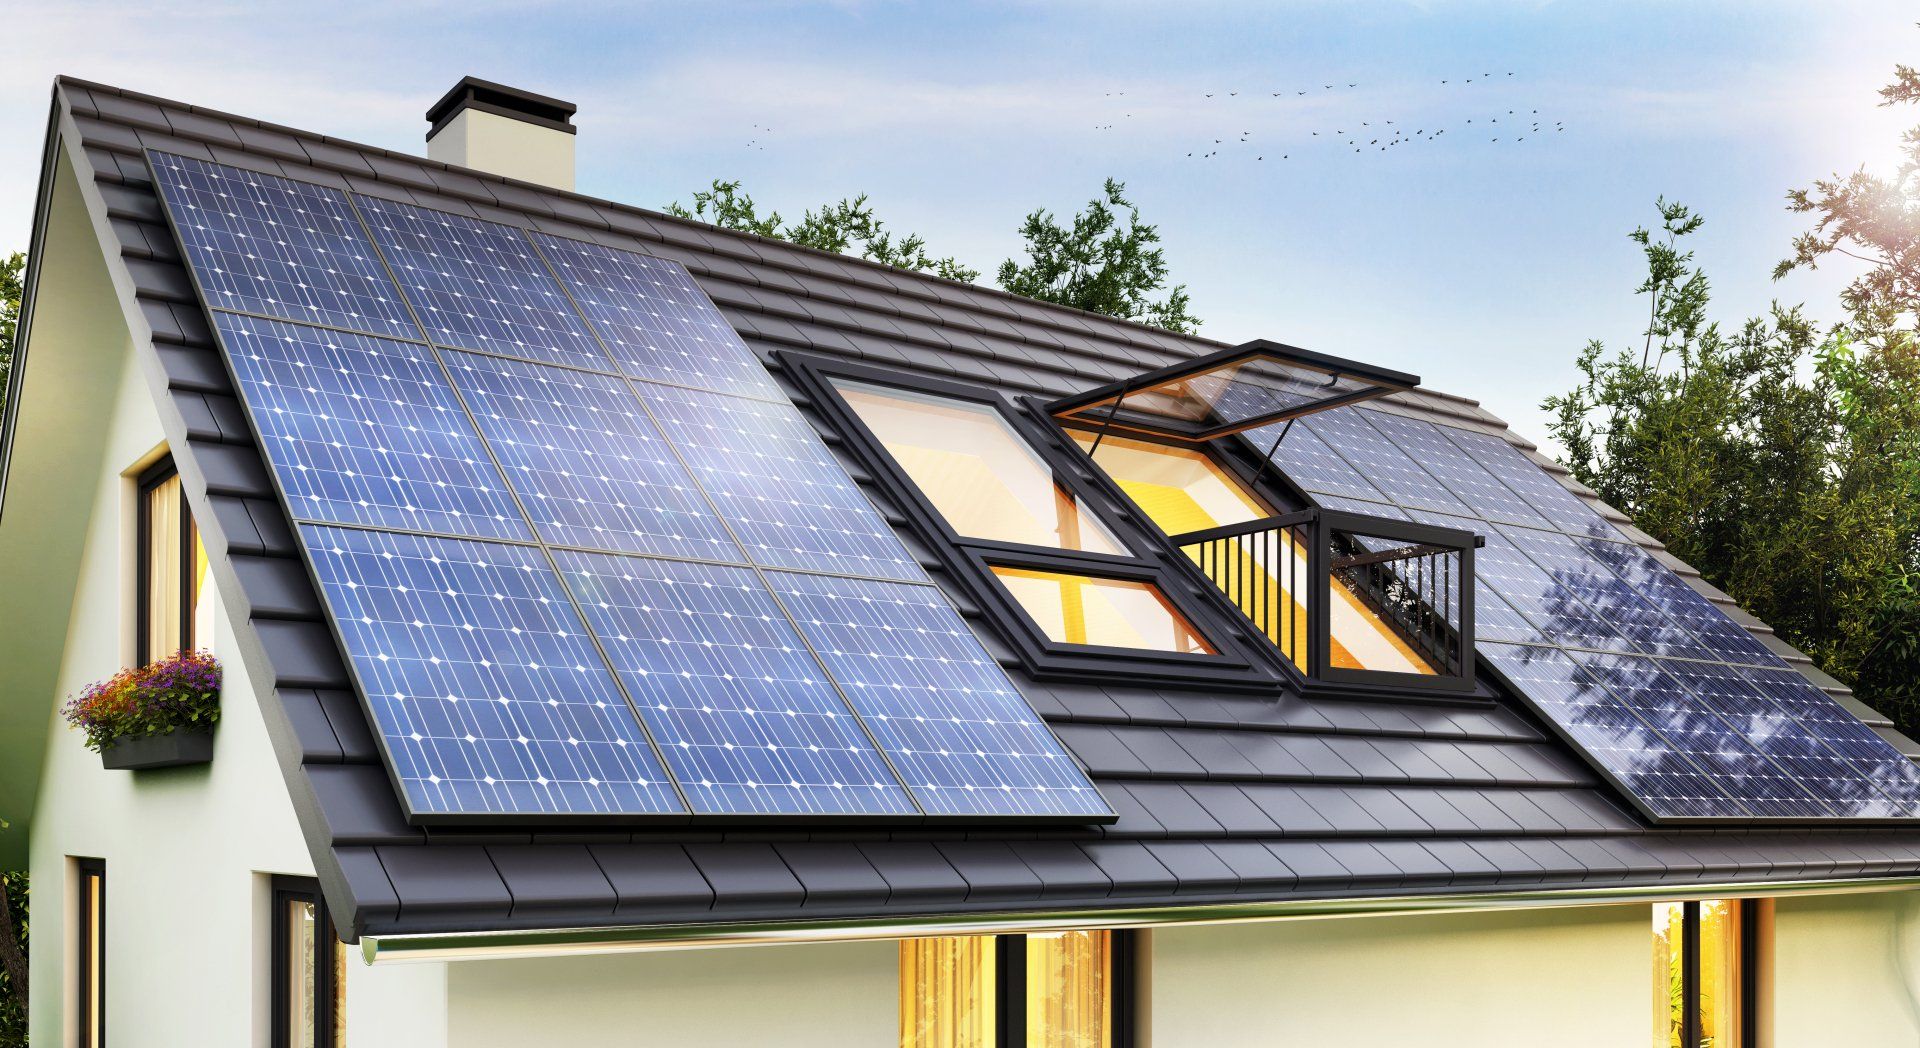 Do solar panels have health risks? Unrevealing the Truth